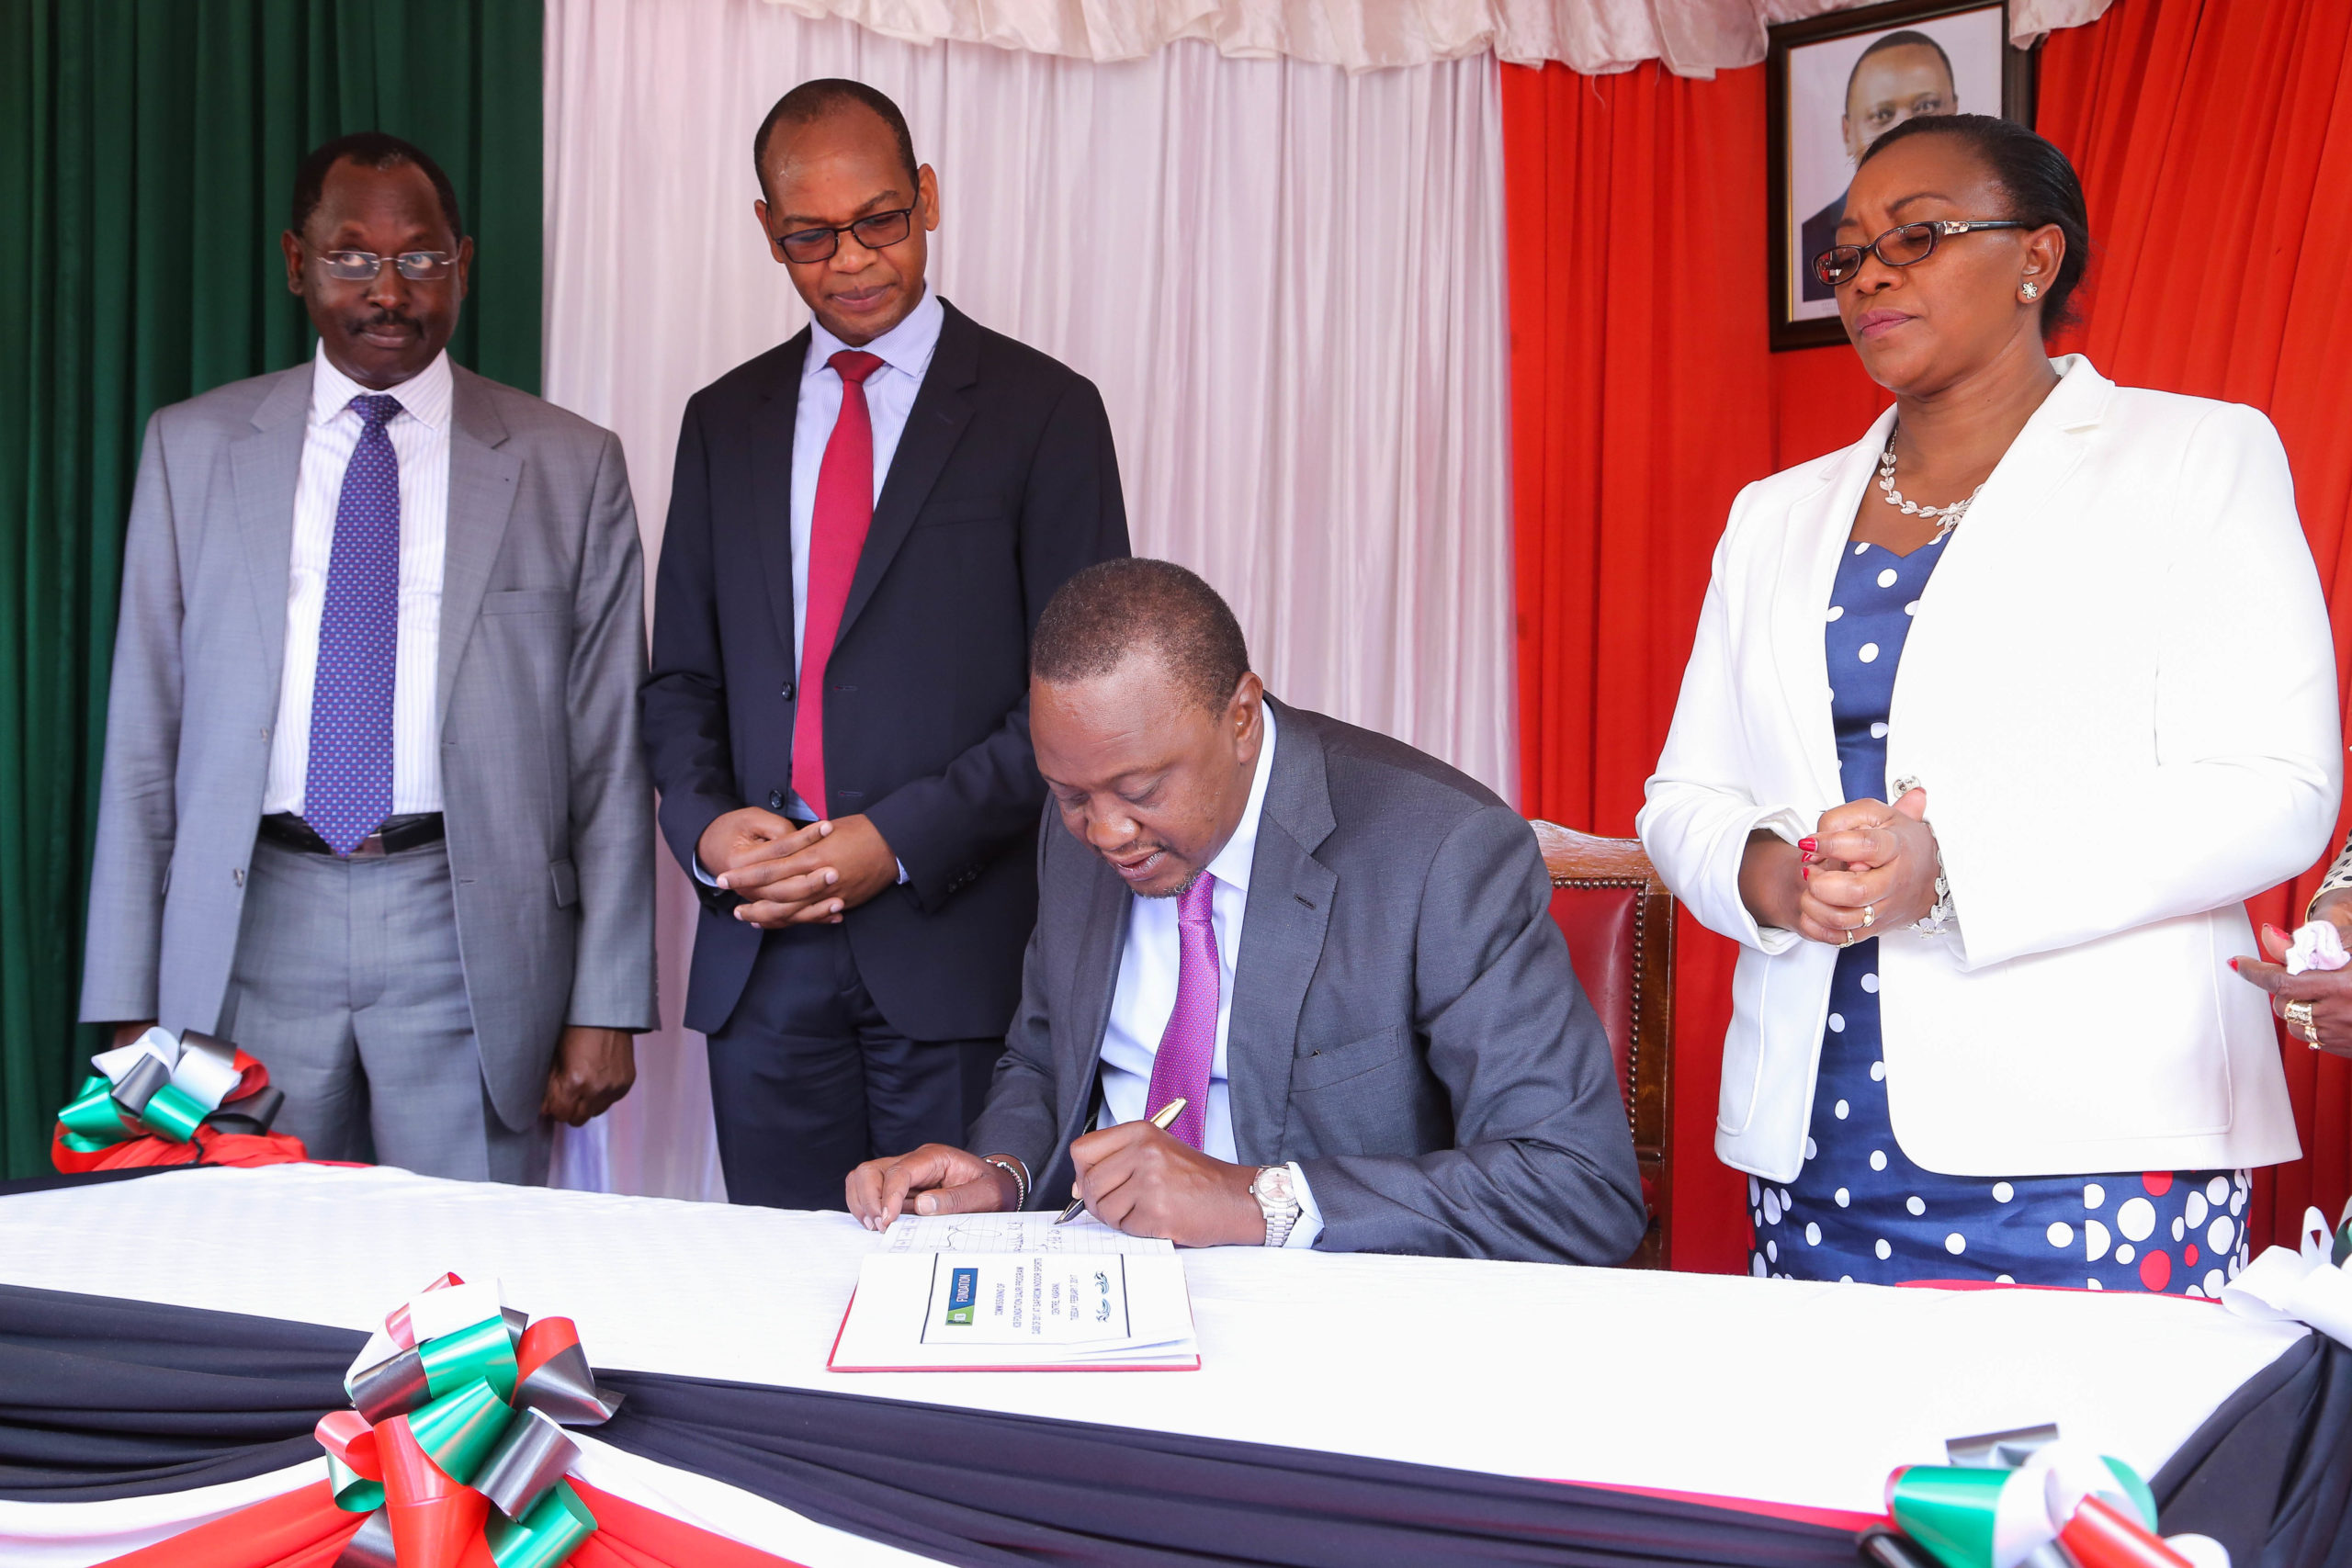 President Uhuru Kenyatta signs the Guest book on arrival at the venue during the commissioning of the 2jiajri class of 2017. Looking on is (L-R) KCB Chairman Ng'eny Biwott, KCB Group MD and CEO Joshua Oigara and Youth and Gender Affairs CS Sicily Kariuki.